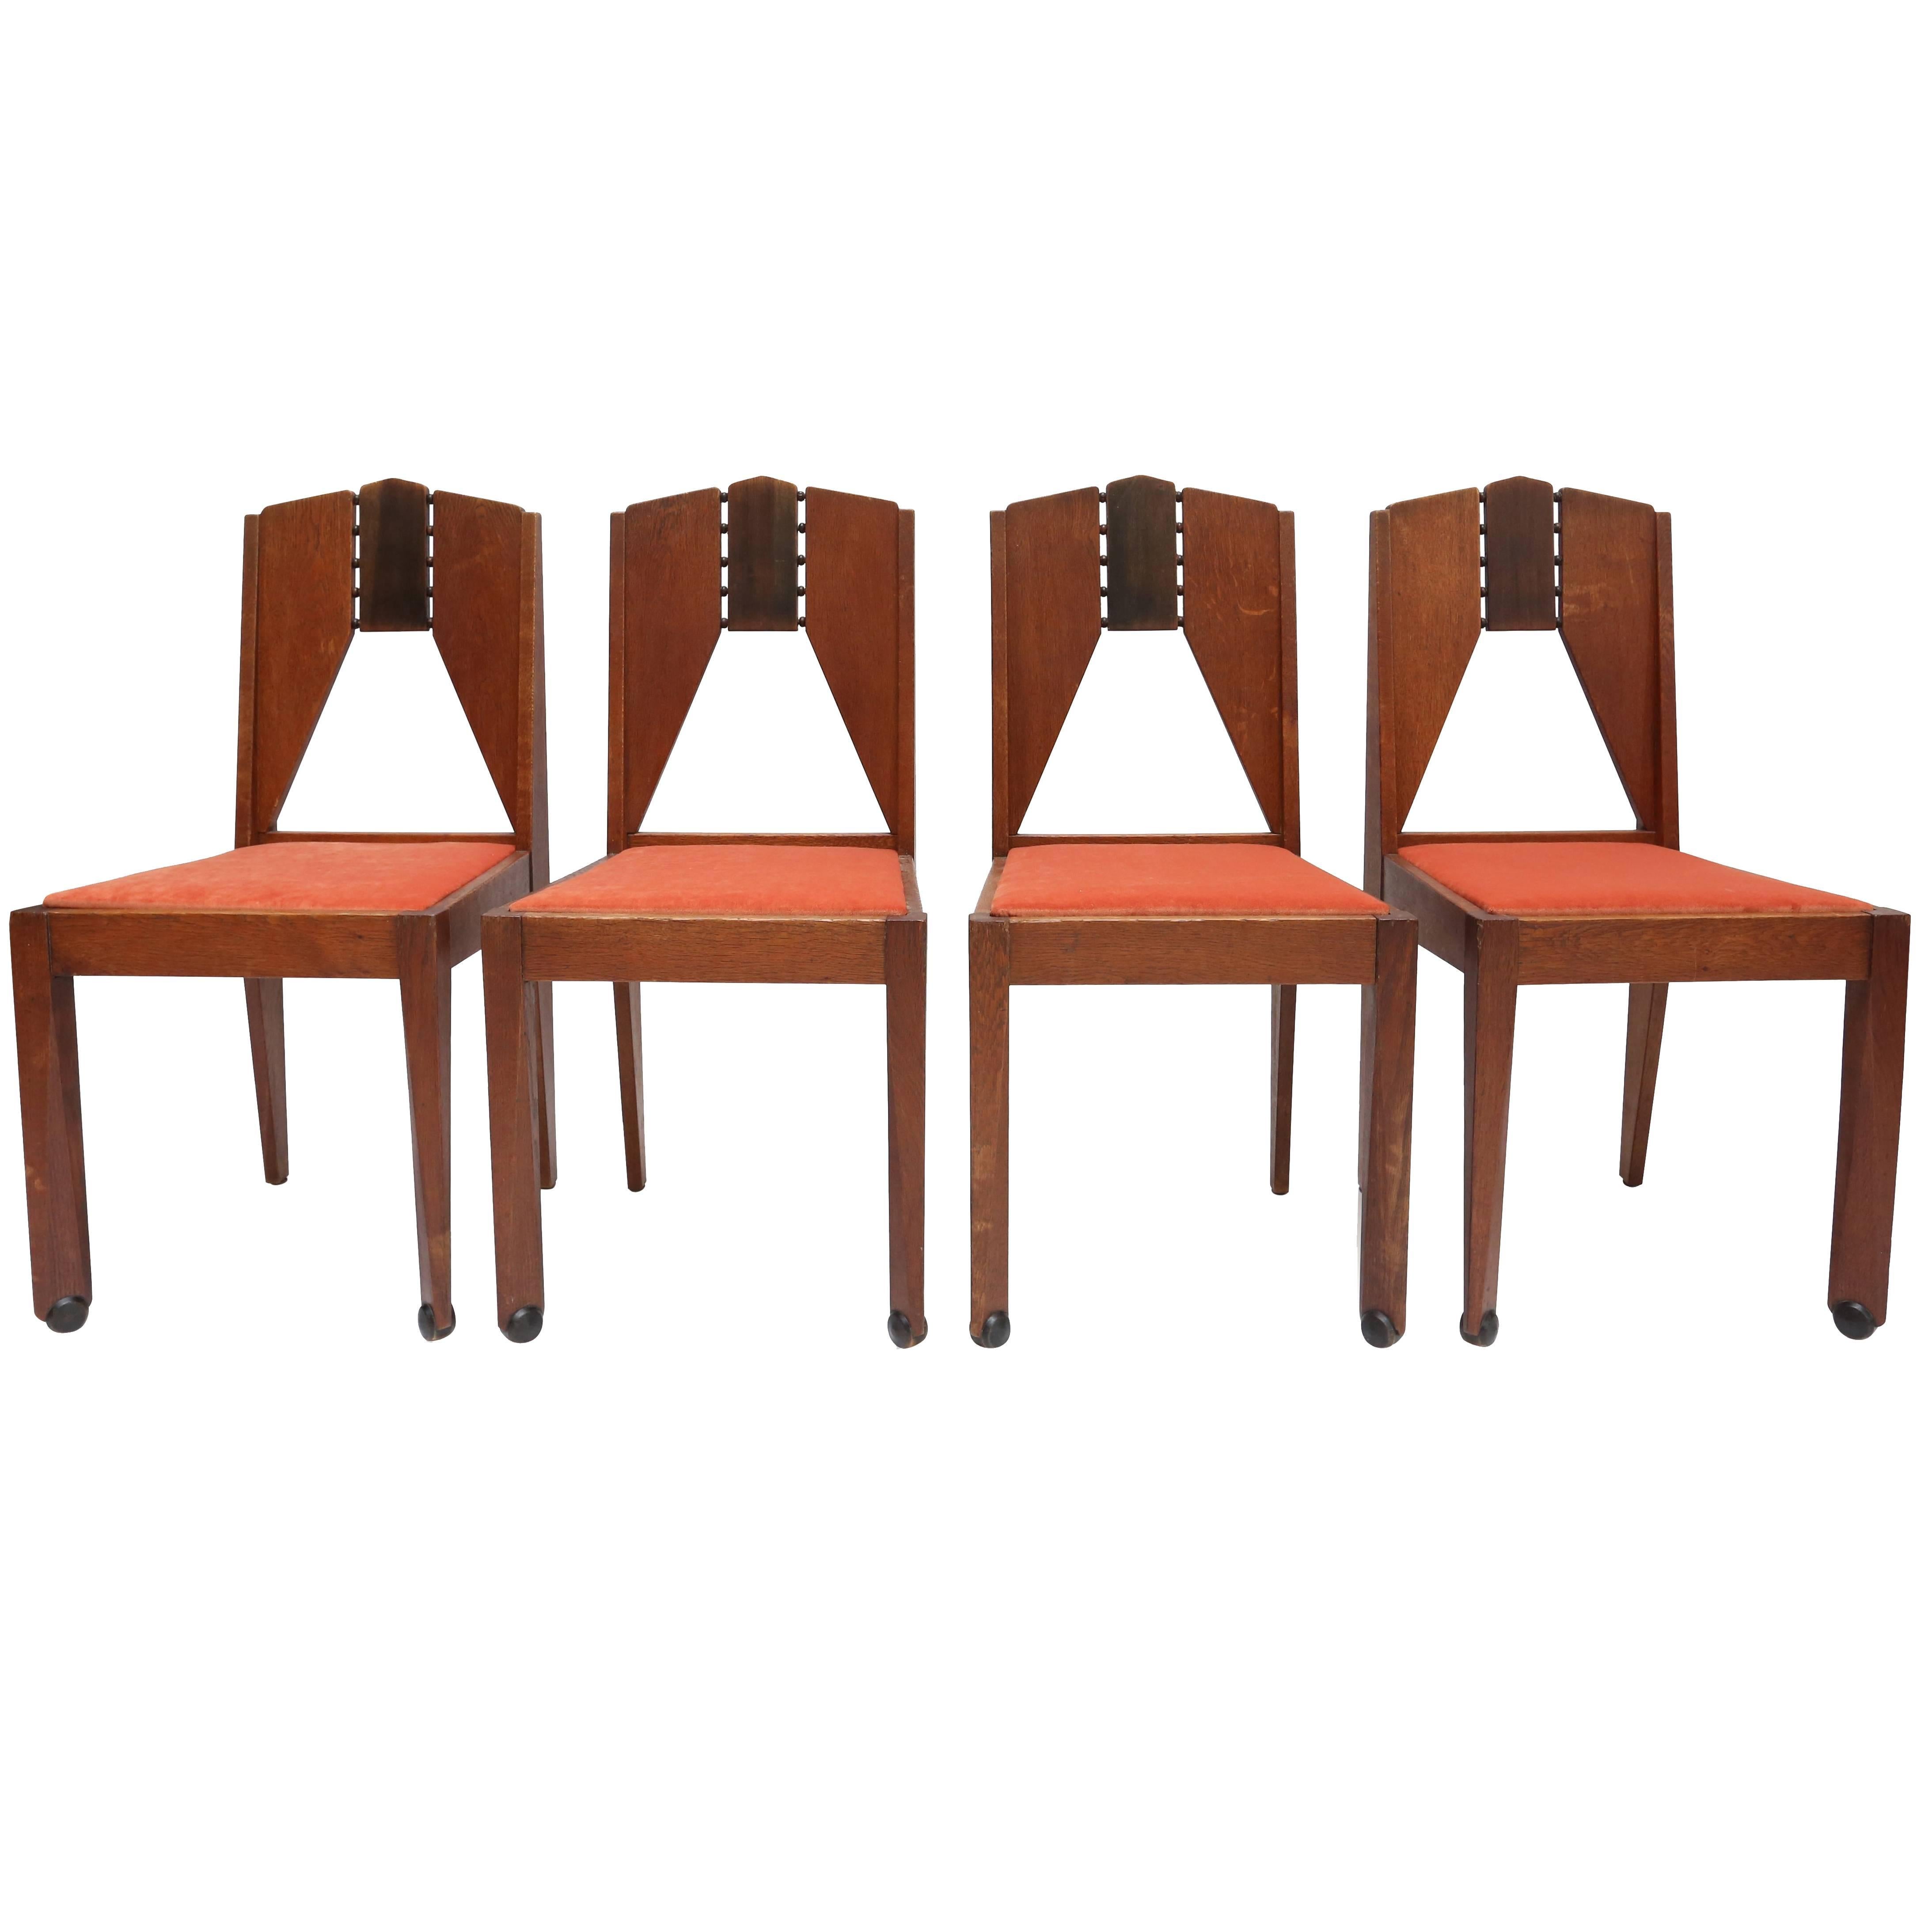 Set of Four Amsterdam School Chairs